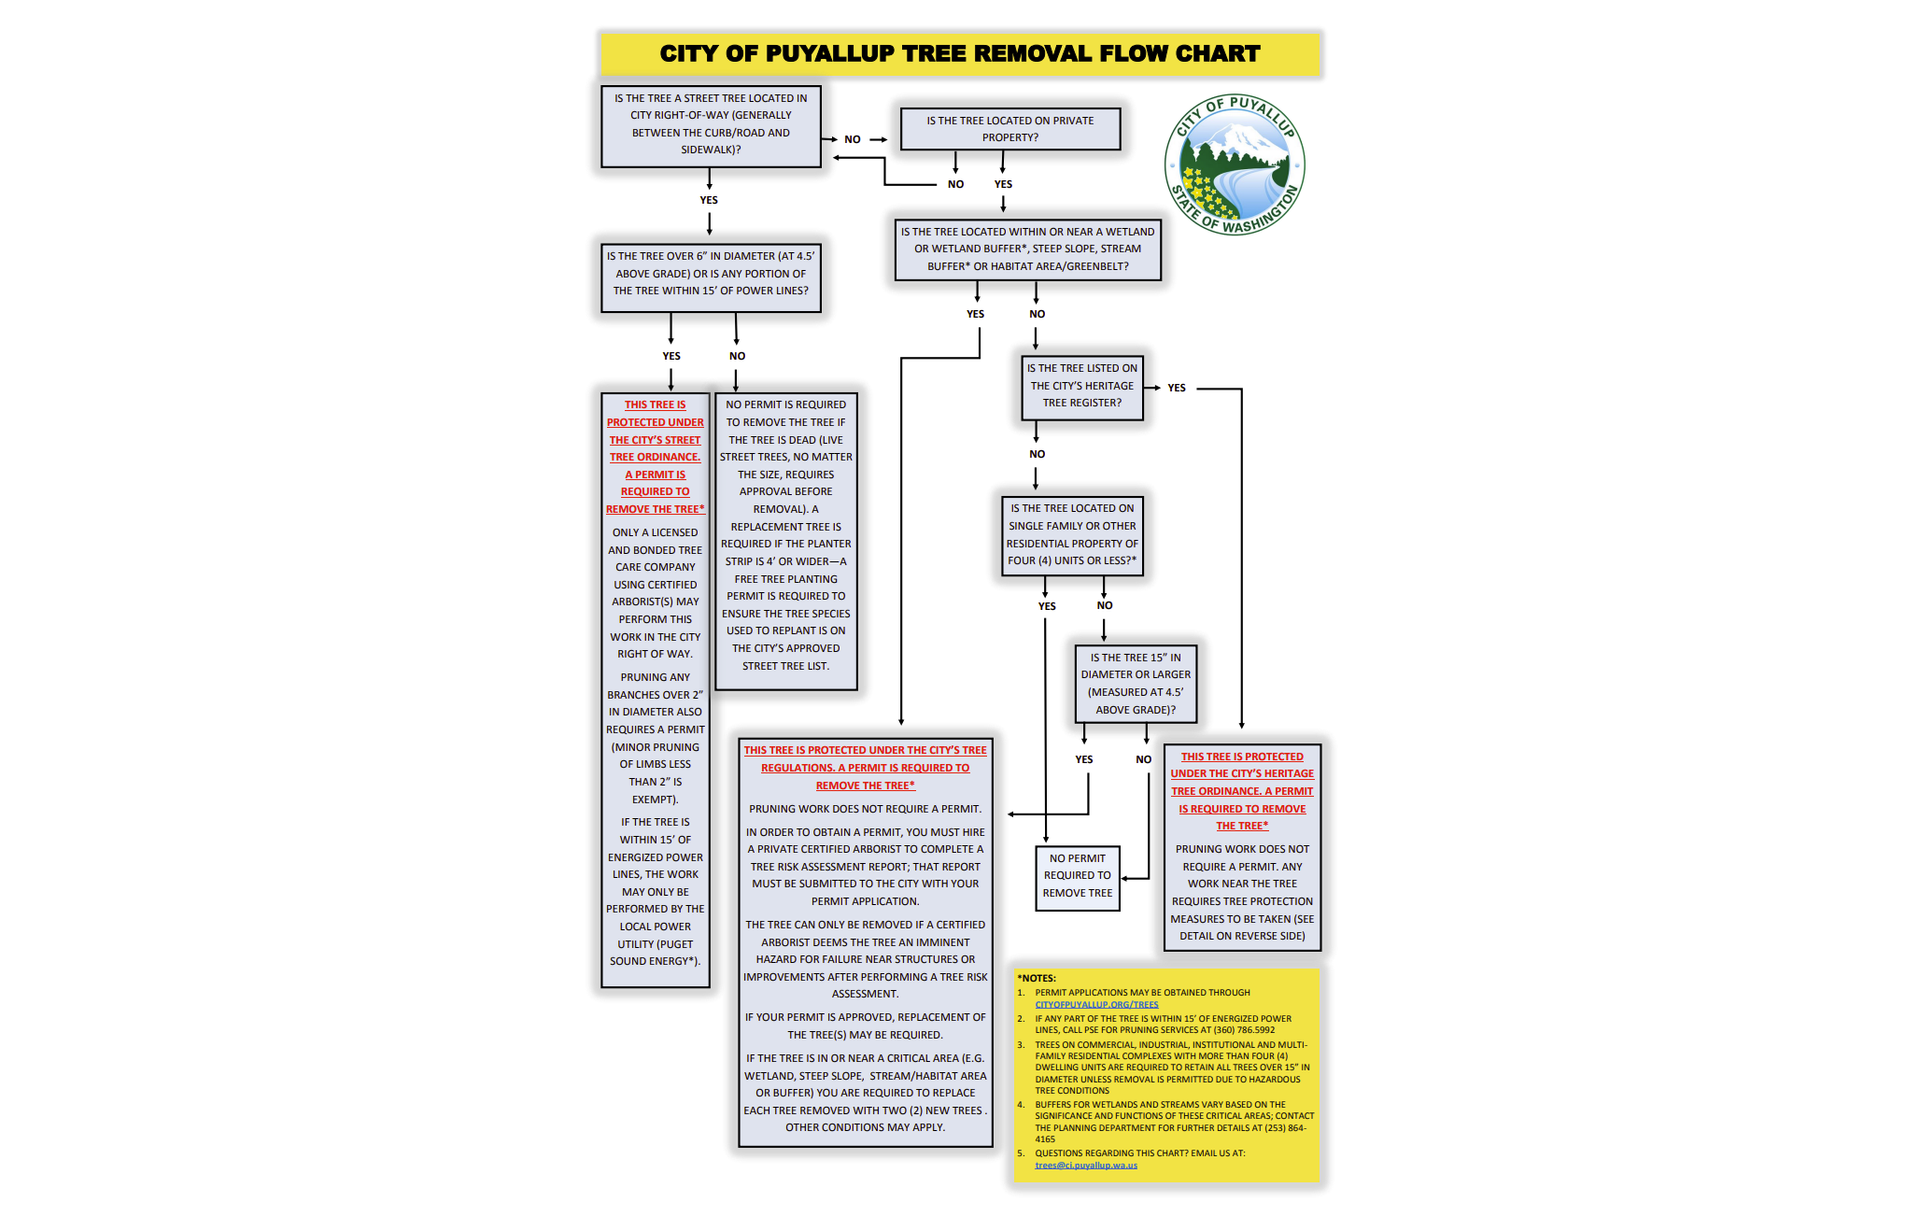 A flow chart for puyallup tree removal